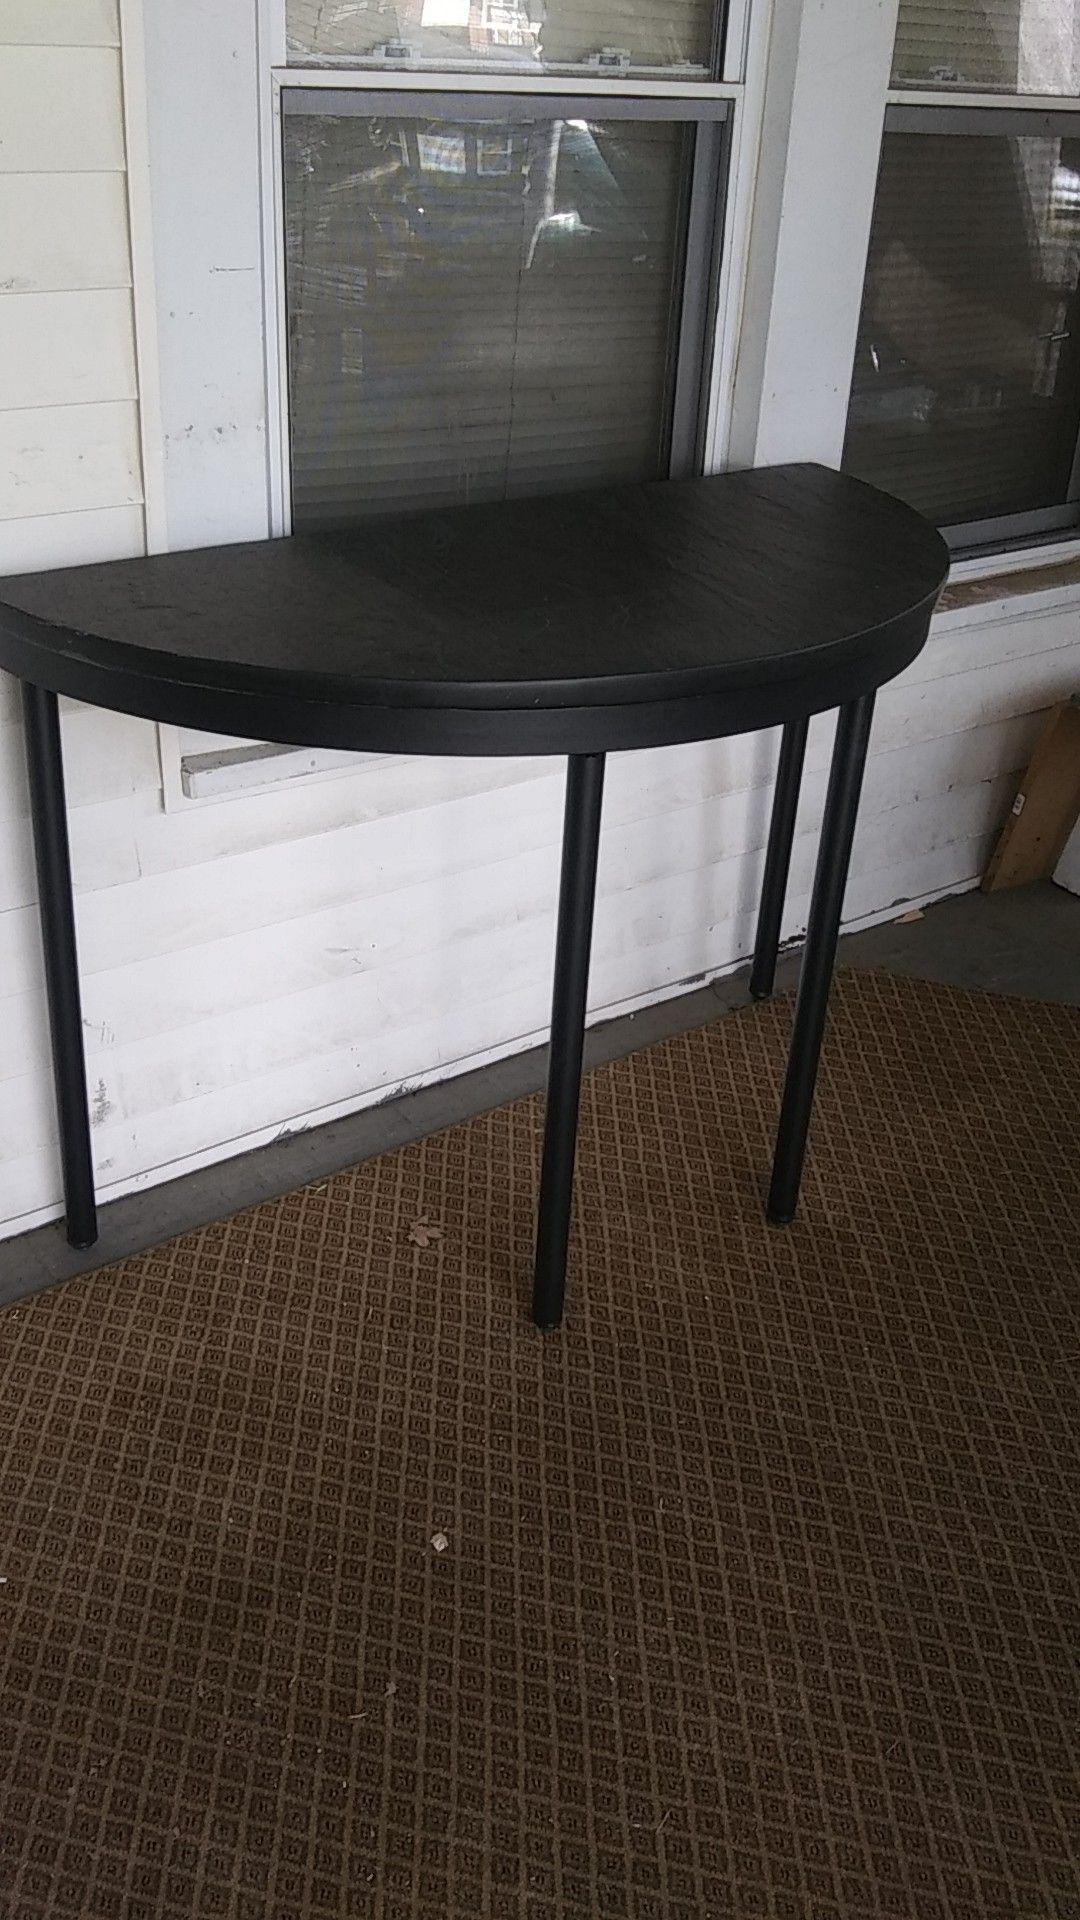 Super nice 50" wide real marble top table. Excellent condition!